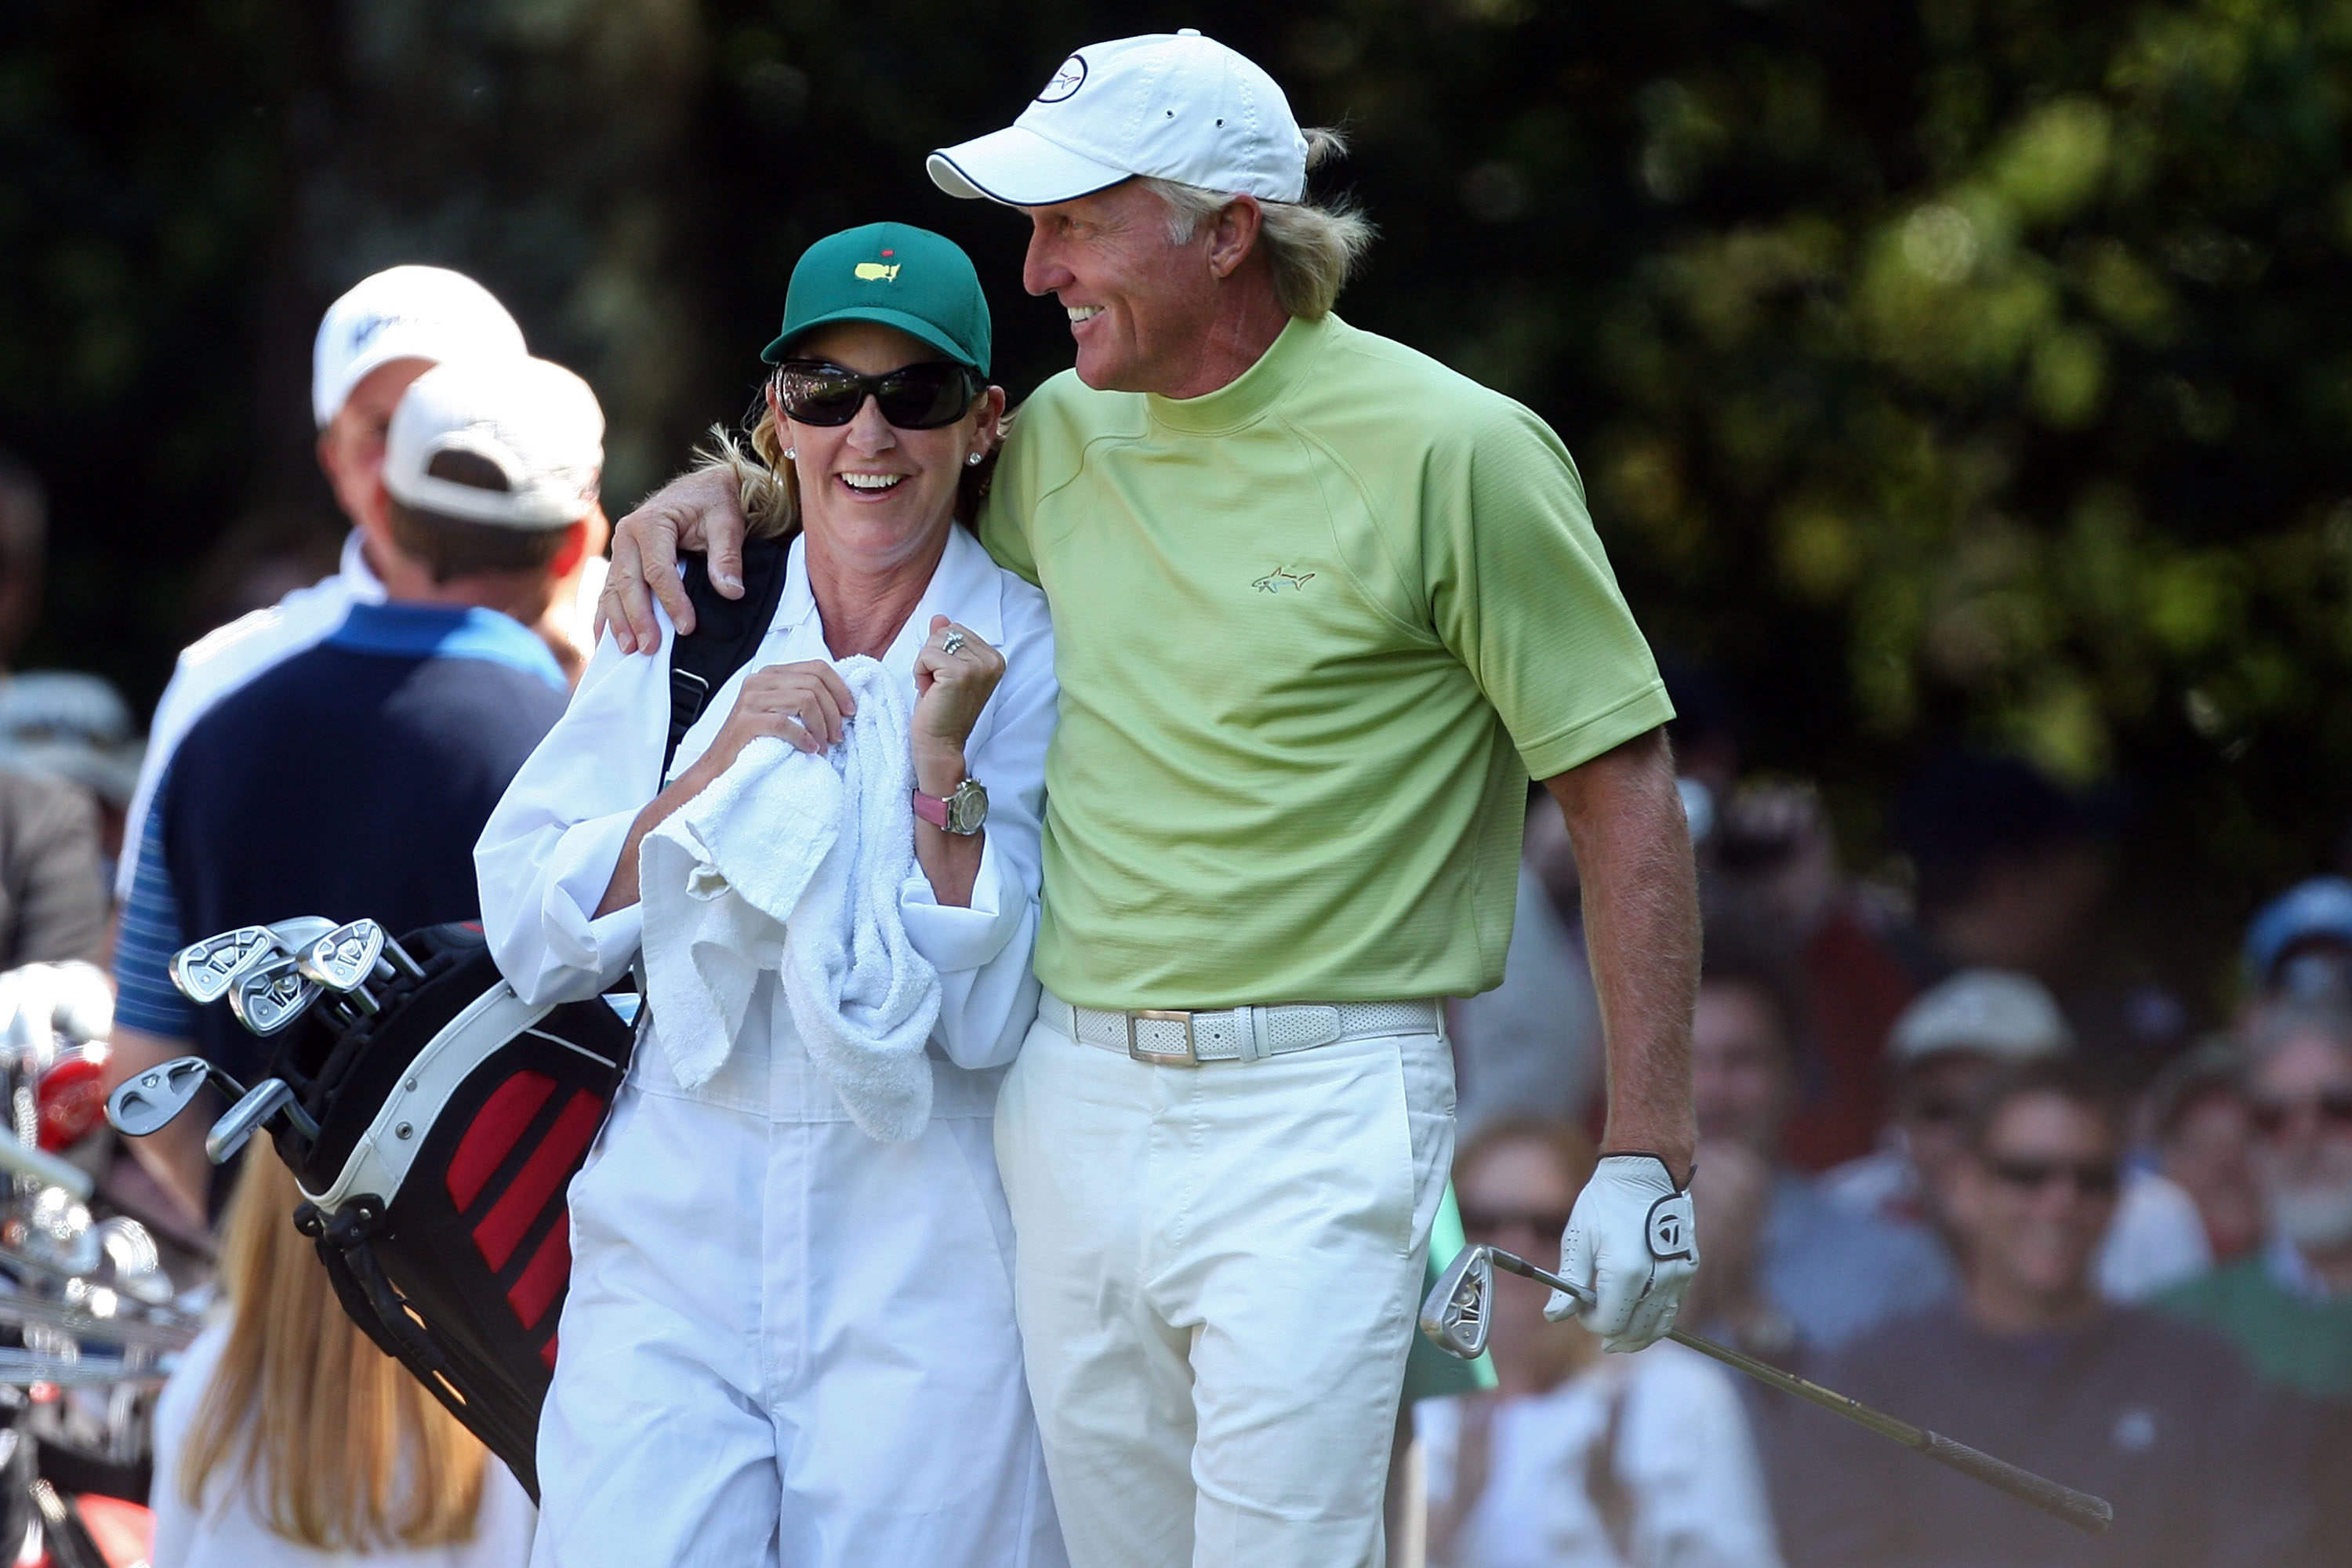 Golfer Greg Norman celebrates a hole-in-one with his wife/caddie Chris Evert at the 2009 Augusta